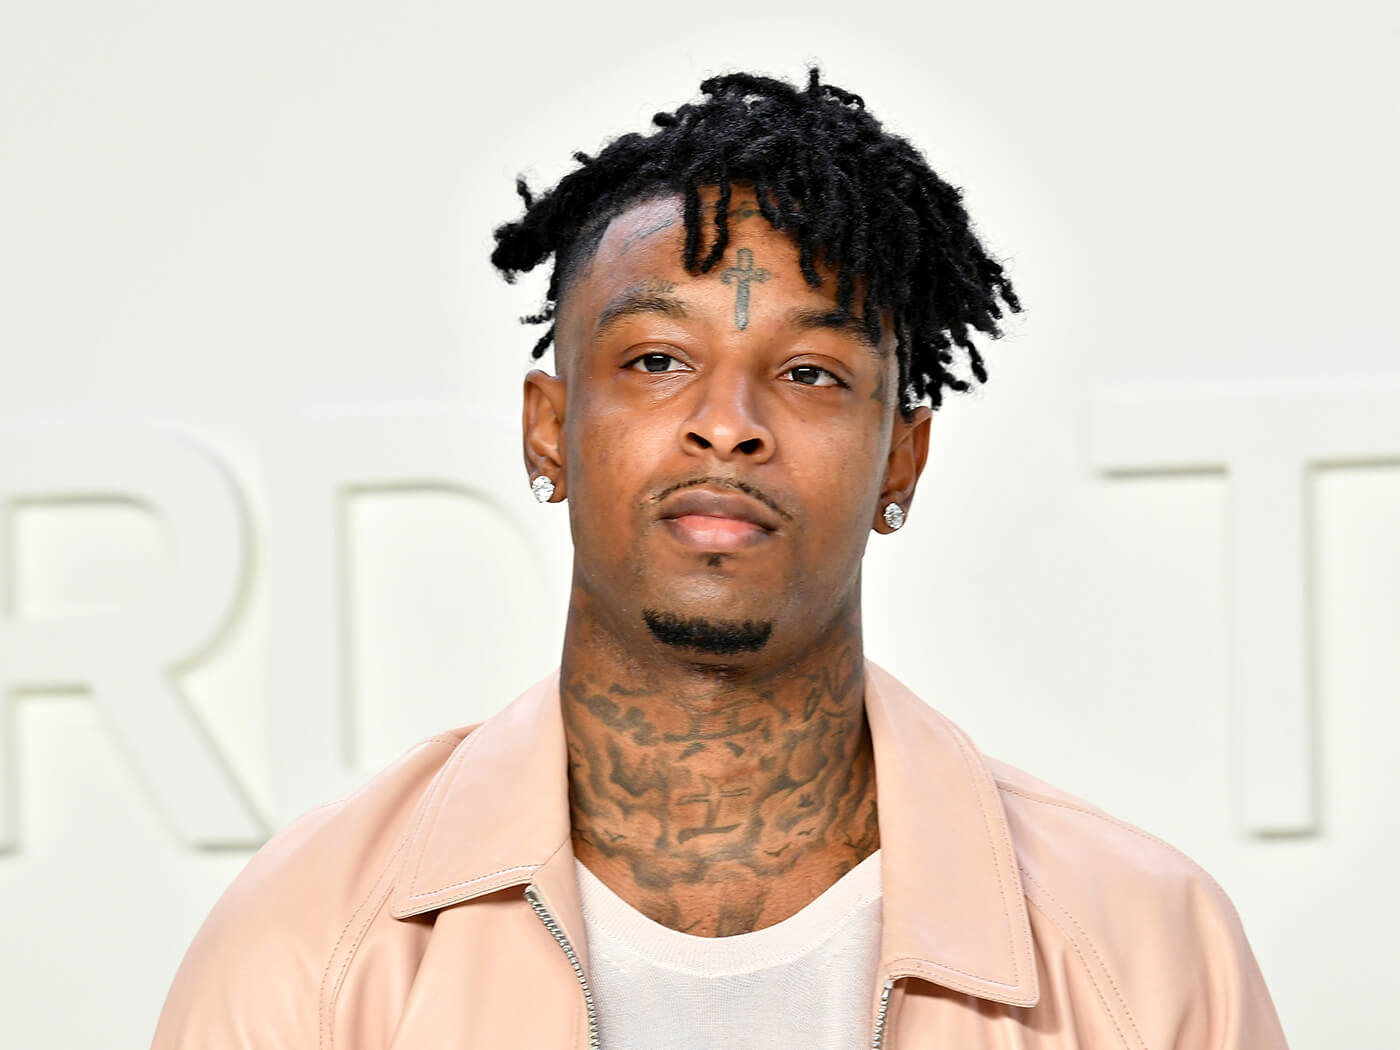 21 Savage In 2020 , HD Wallpaper & Backgrounds